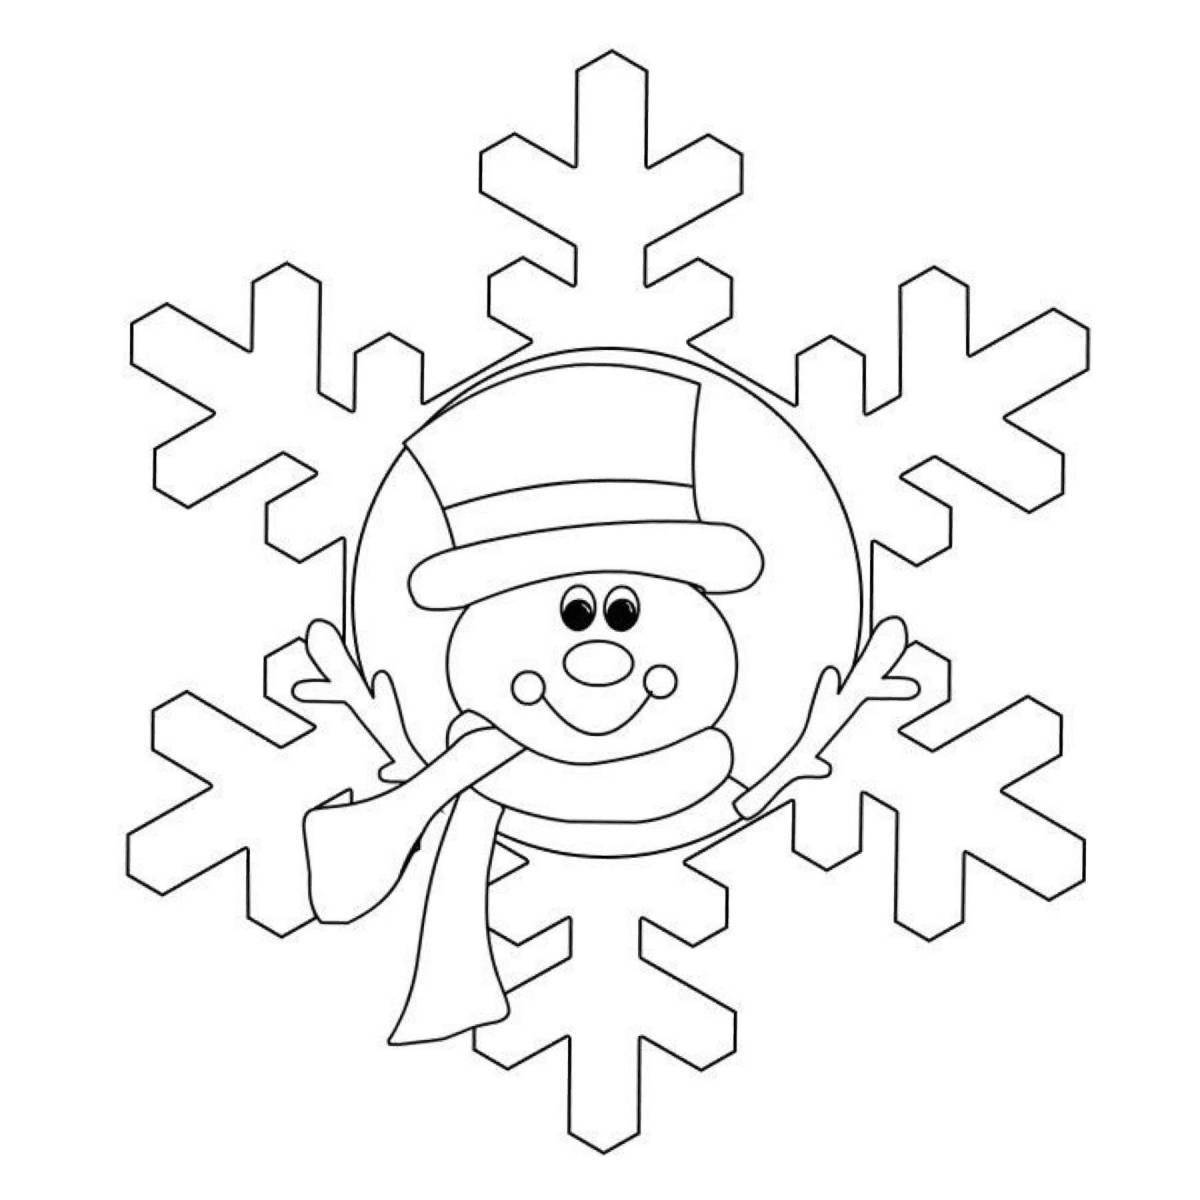 Fantastic snowflake coloring book for 4-5 year olds in kindergarten